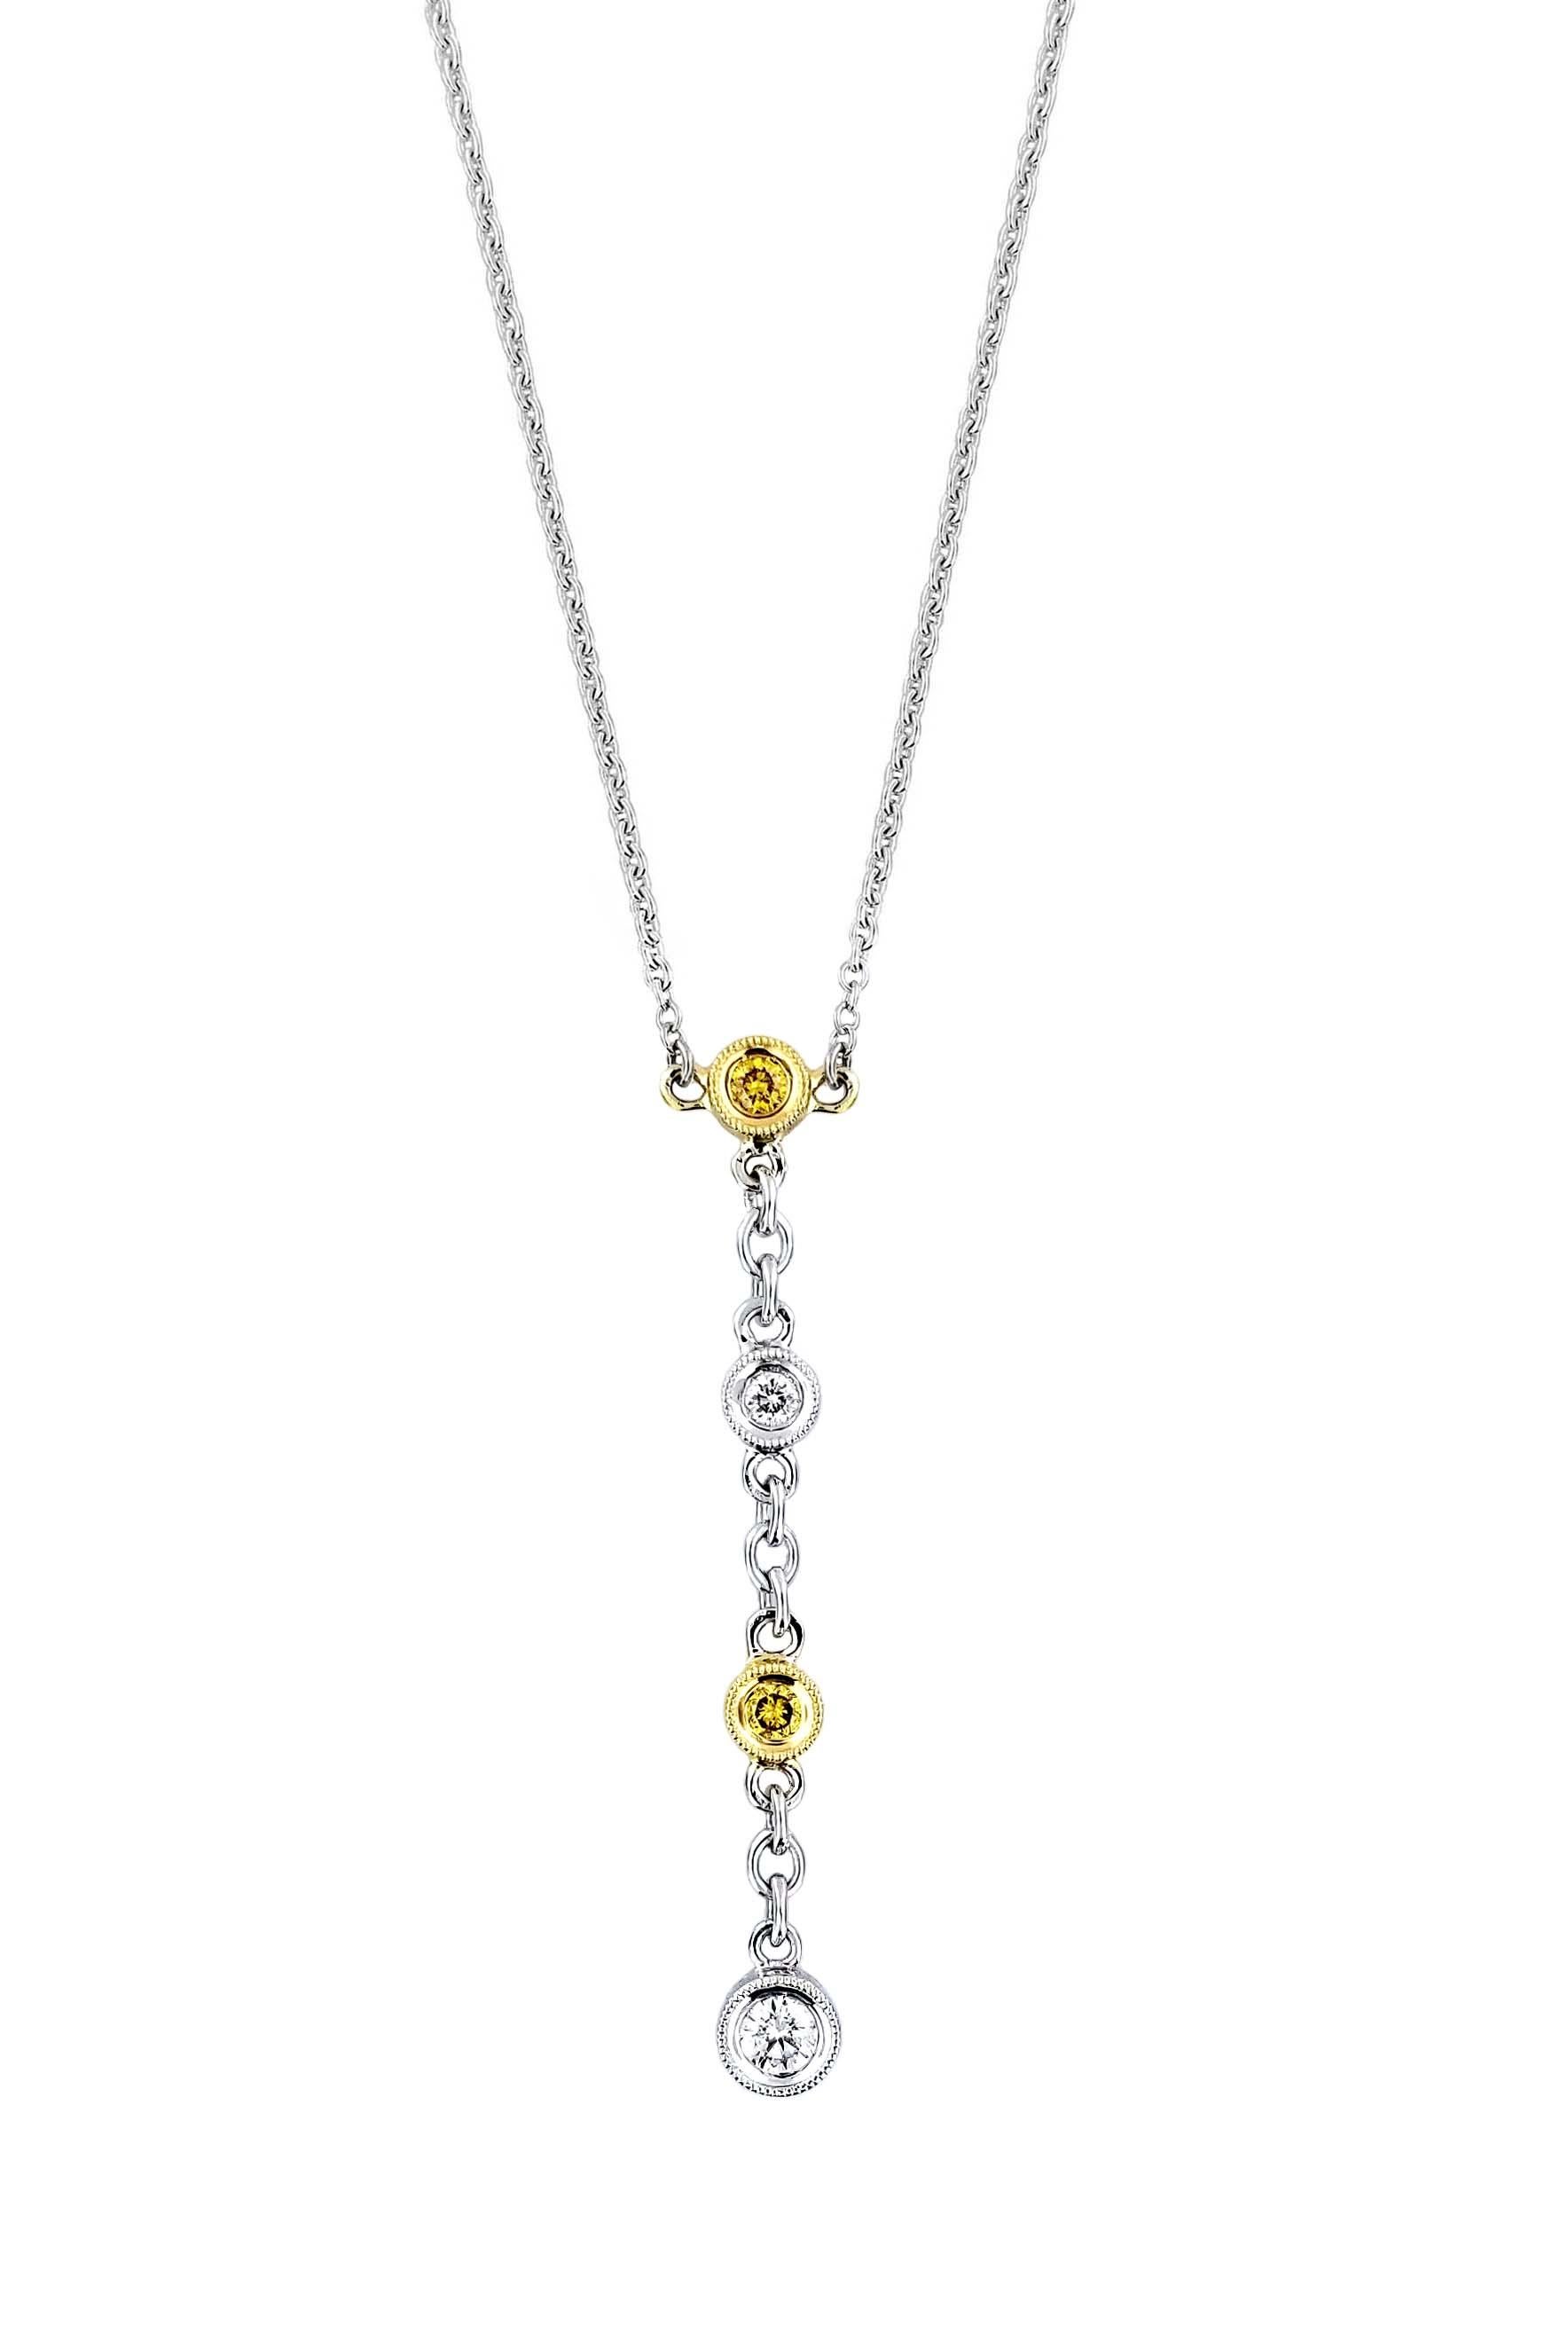 Produced by award winning Italian designer Stefano Vitolo. Stefano creates custom artisanal one of a kind jewelry with excellent gemstones in a truly old world Italian craftmanship.

0.08 carat white diamonds
0.05 carat yellow diamonds